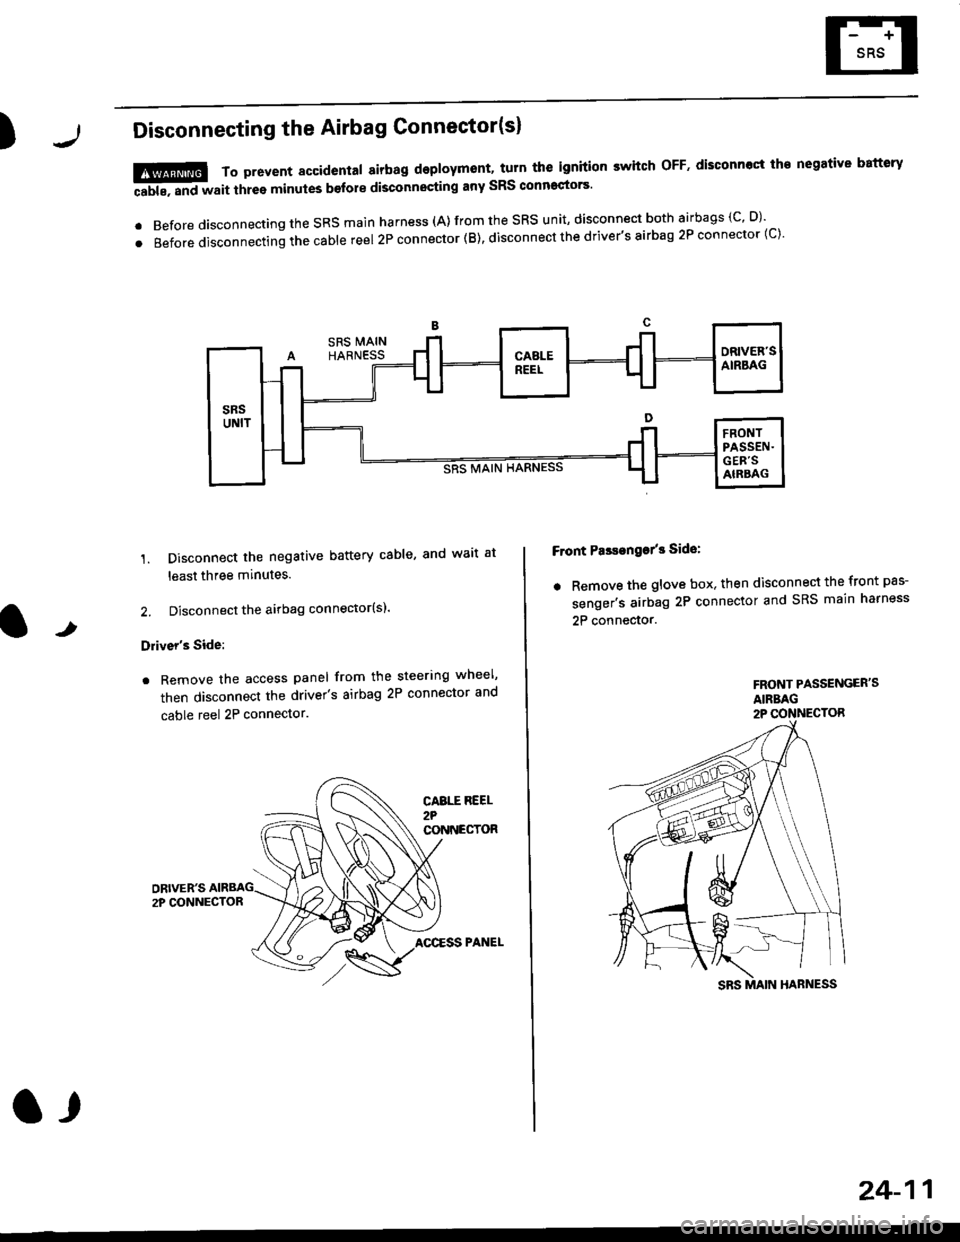 HONDA CIVIC 1999 6.G Workshop Manual )Disconnecting the Airbag Connector(sl
1. Disconnect the negative battery cable, and wait at
least three minutes.
2. Disconnect the airbag connector(sl.
Drivers Side:
. Remove the access panel from 